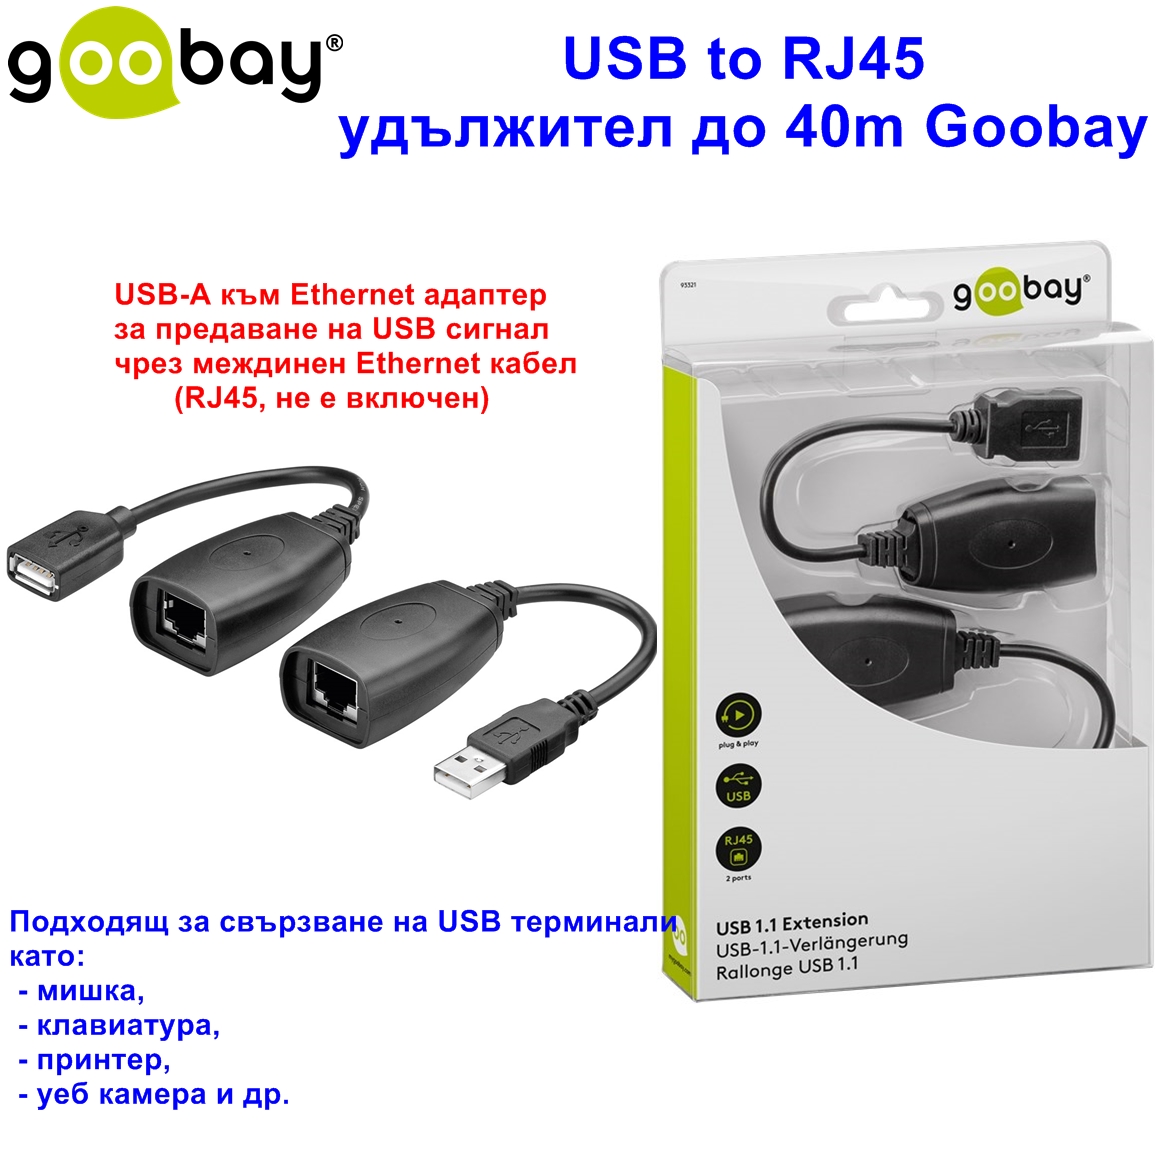 USB to RJ45 extension to 40m Goobay 93321